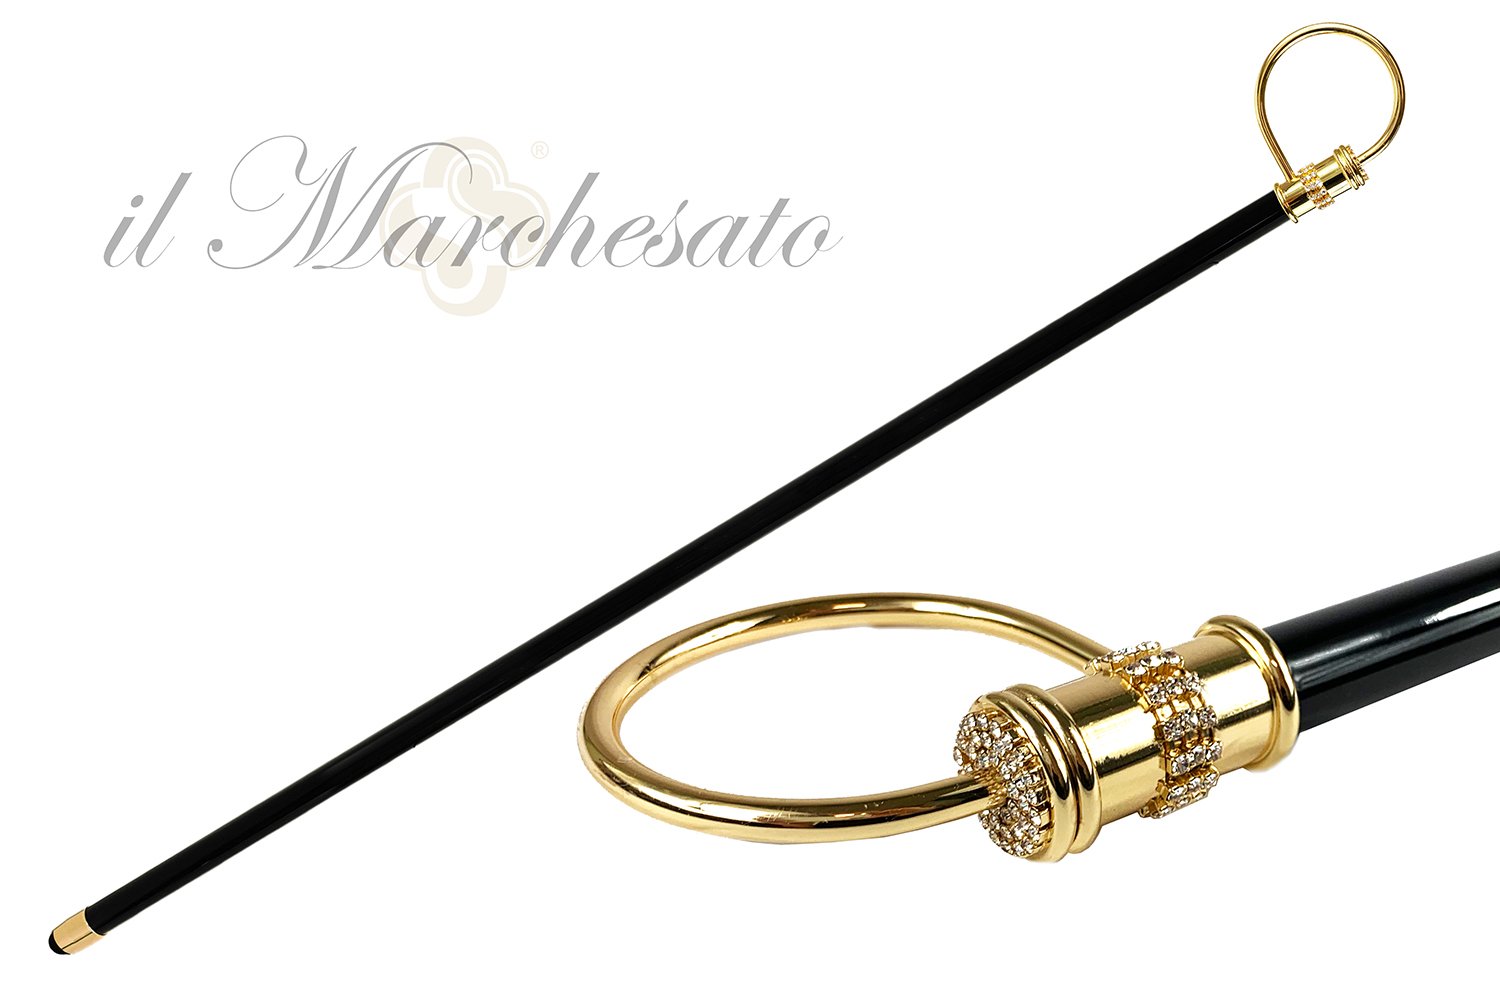 Original collectible Walking stick with crystals - IL MARCHESATO LUXURY UMBRELLAS, CANES AND SHOEHORNS